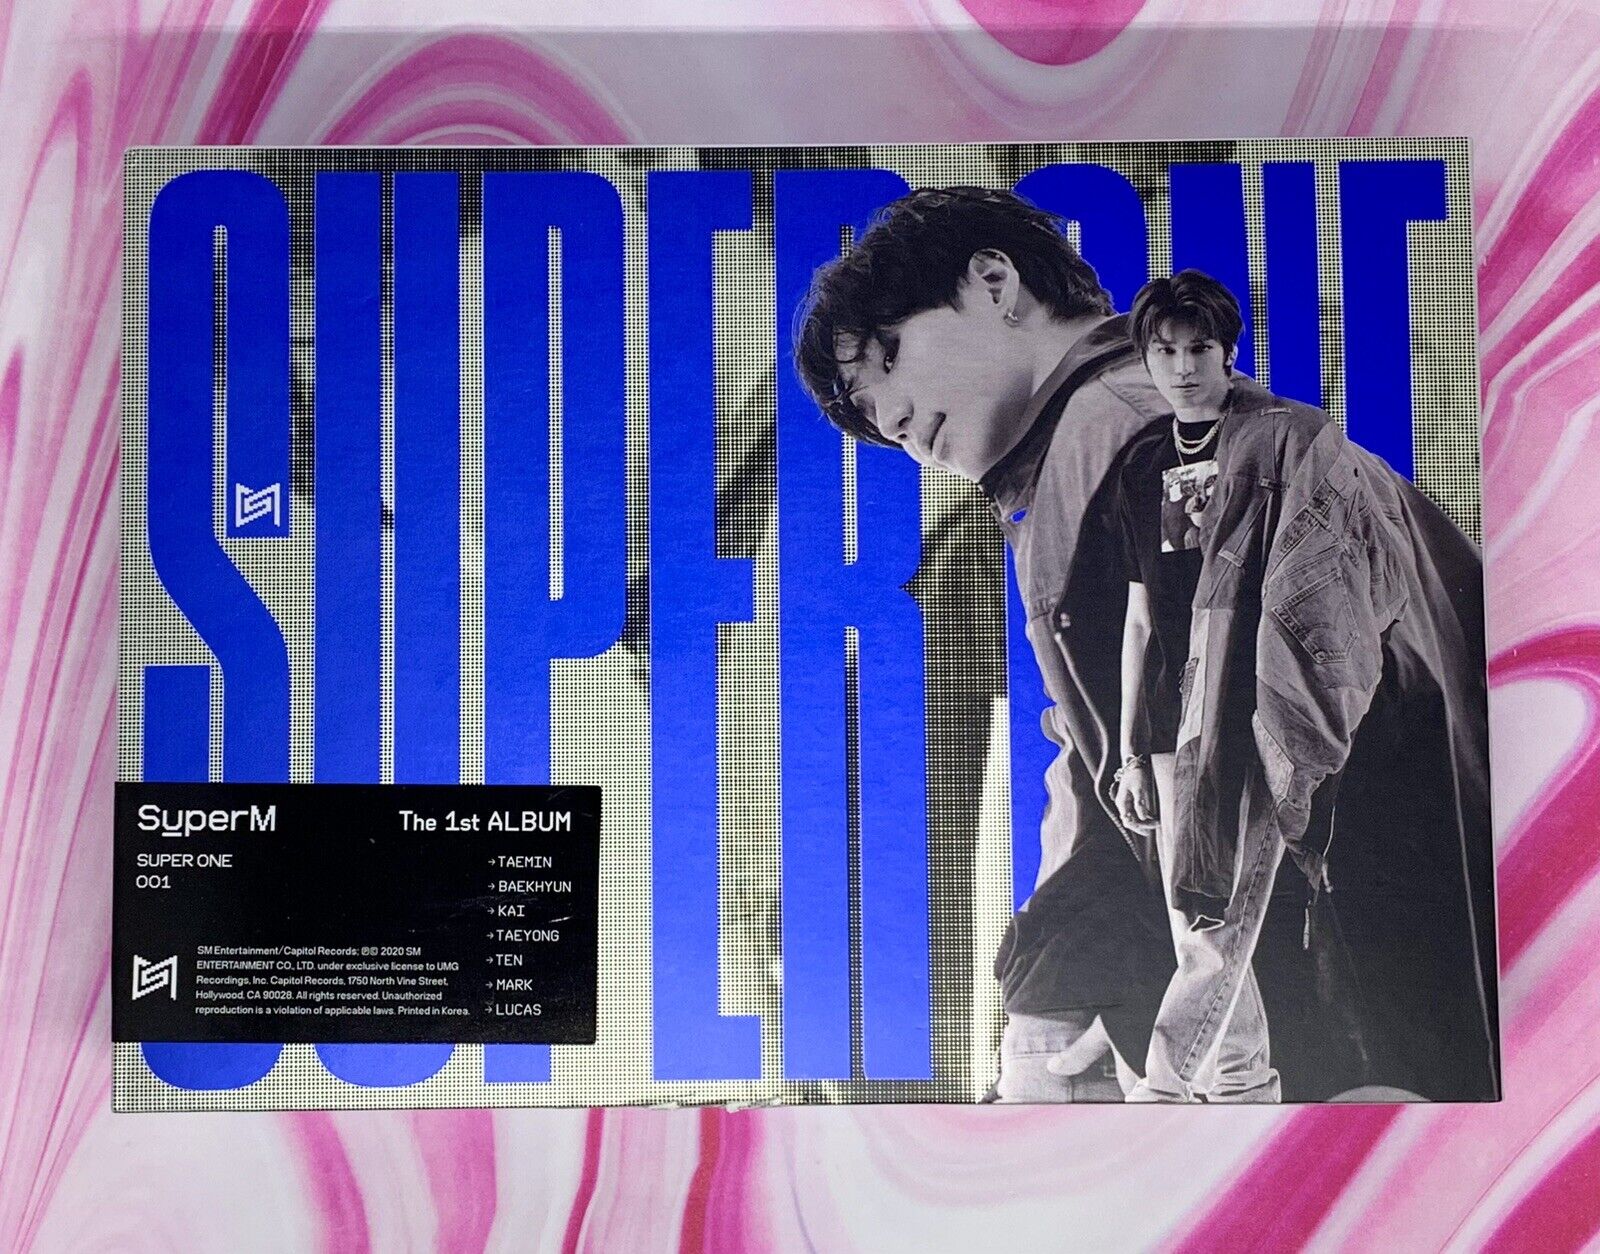 SuperM Super One 1st Album CD with Folded Poster - Unit A (Taemin + Taeyong) Ver